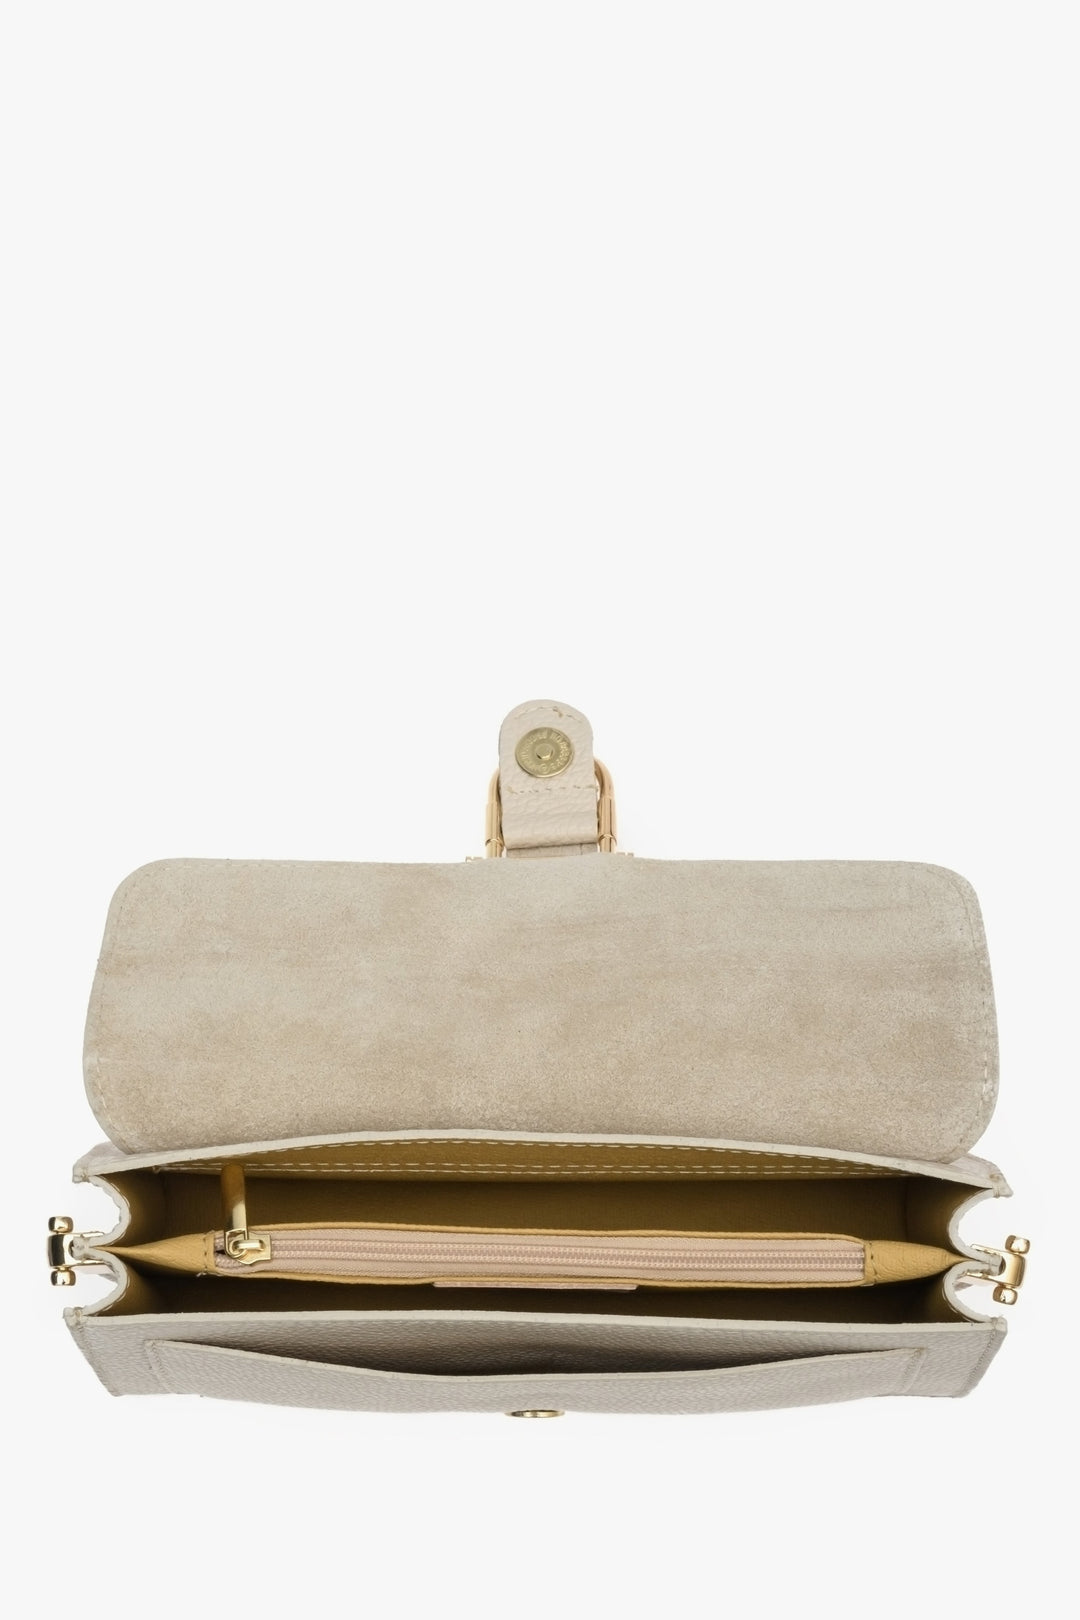 Women's small leather handbag in light beige color - presentation of the lining of the bag.